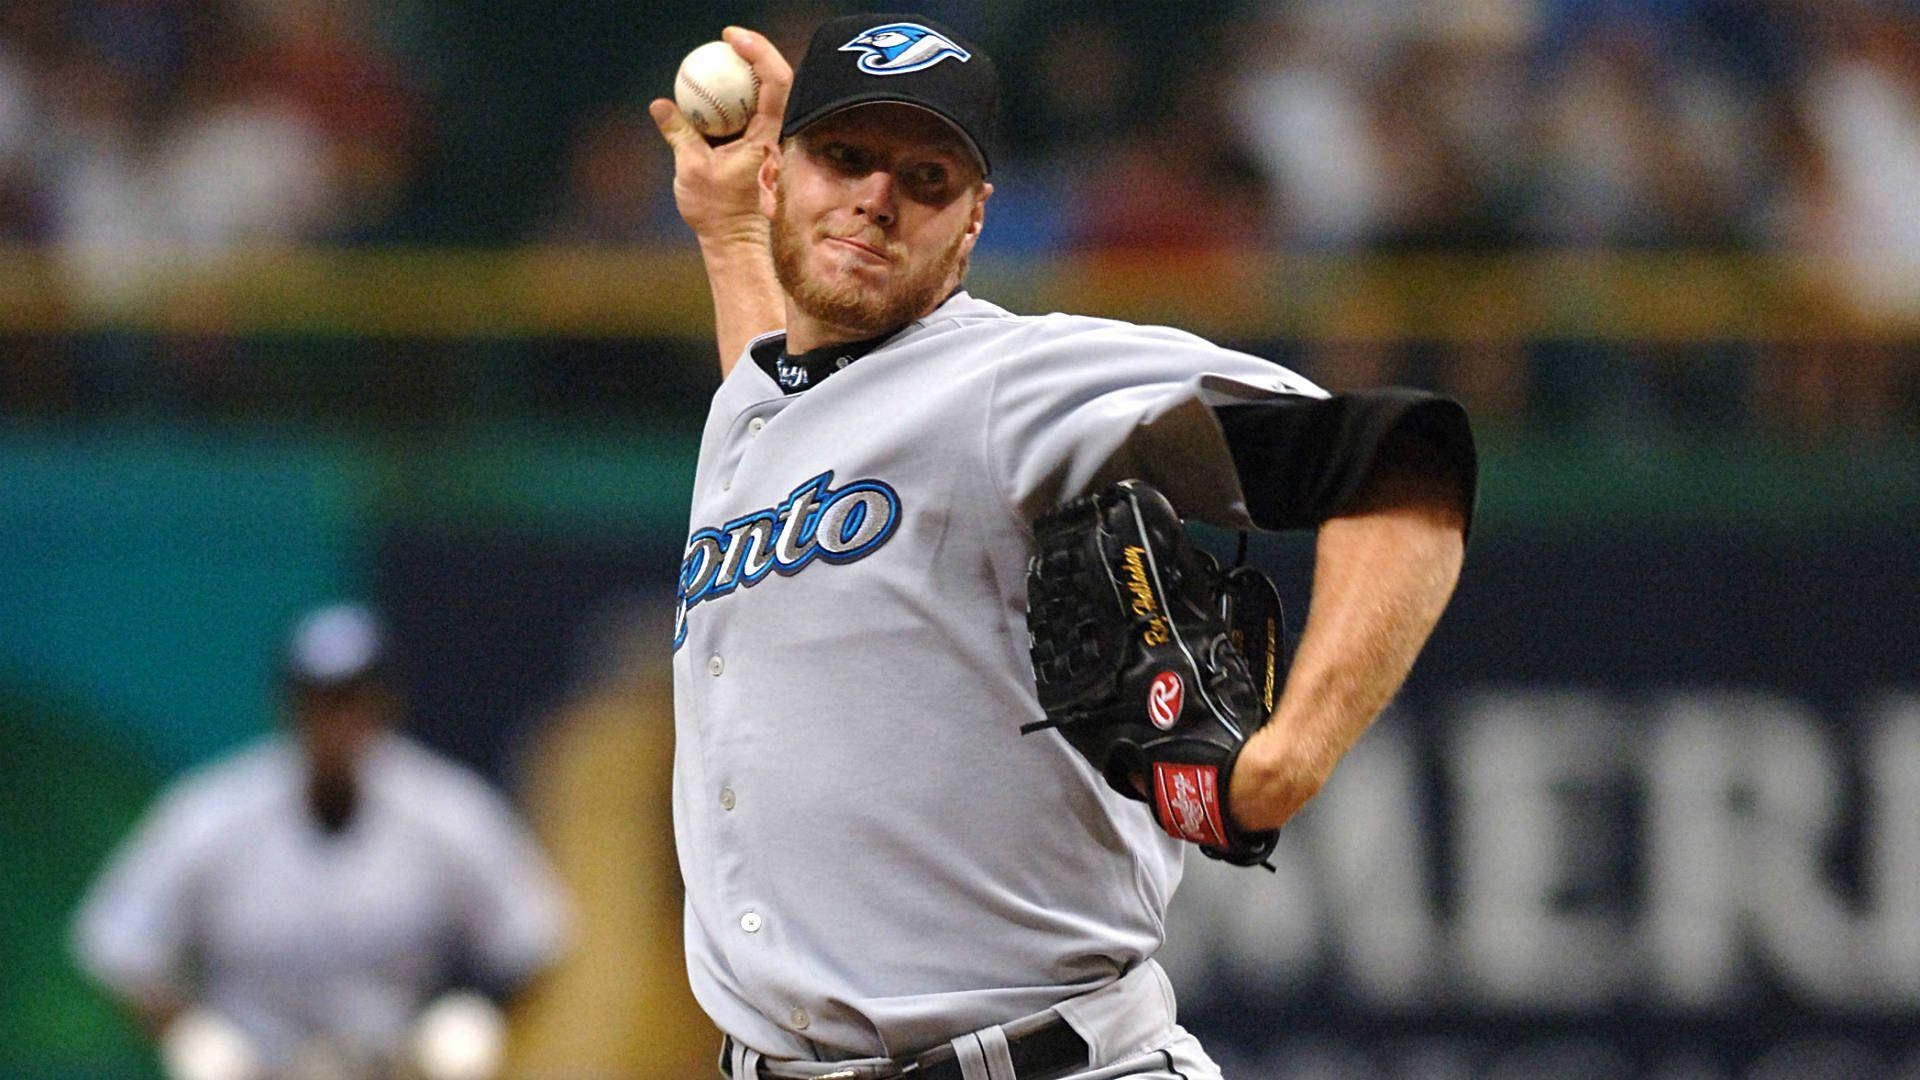 Roy Halladay Throwing Baseball While Holding Glove Wallpaper